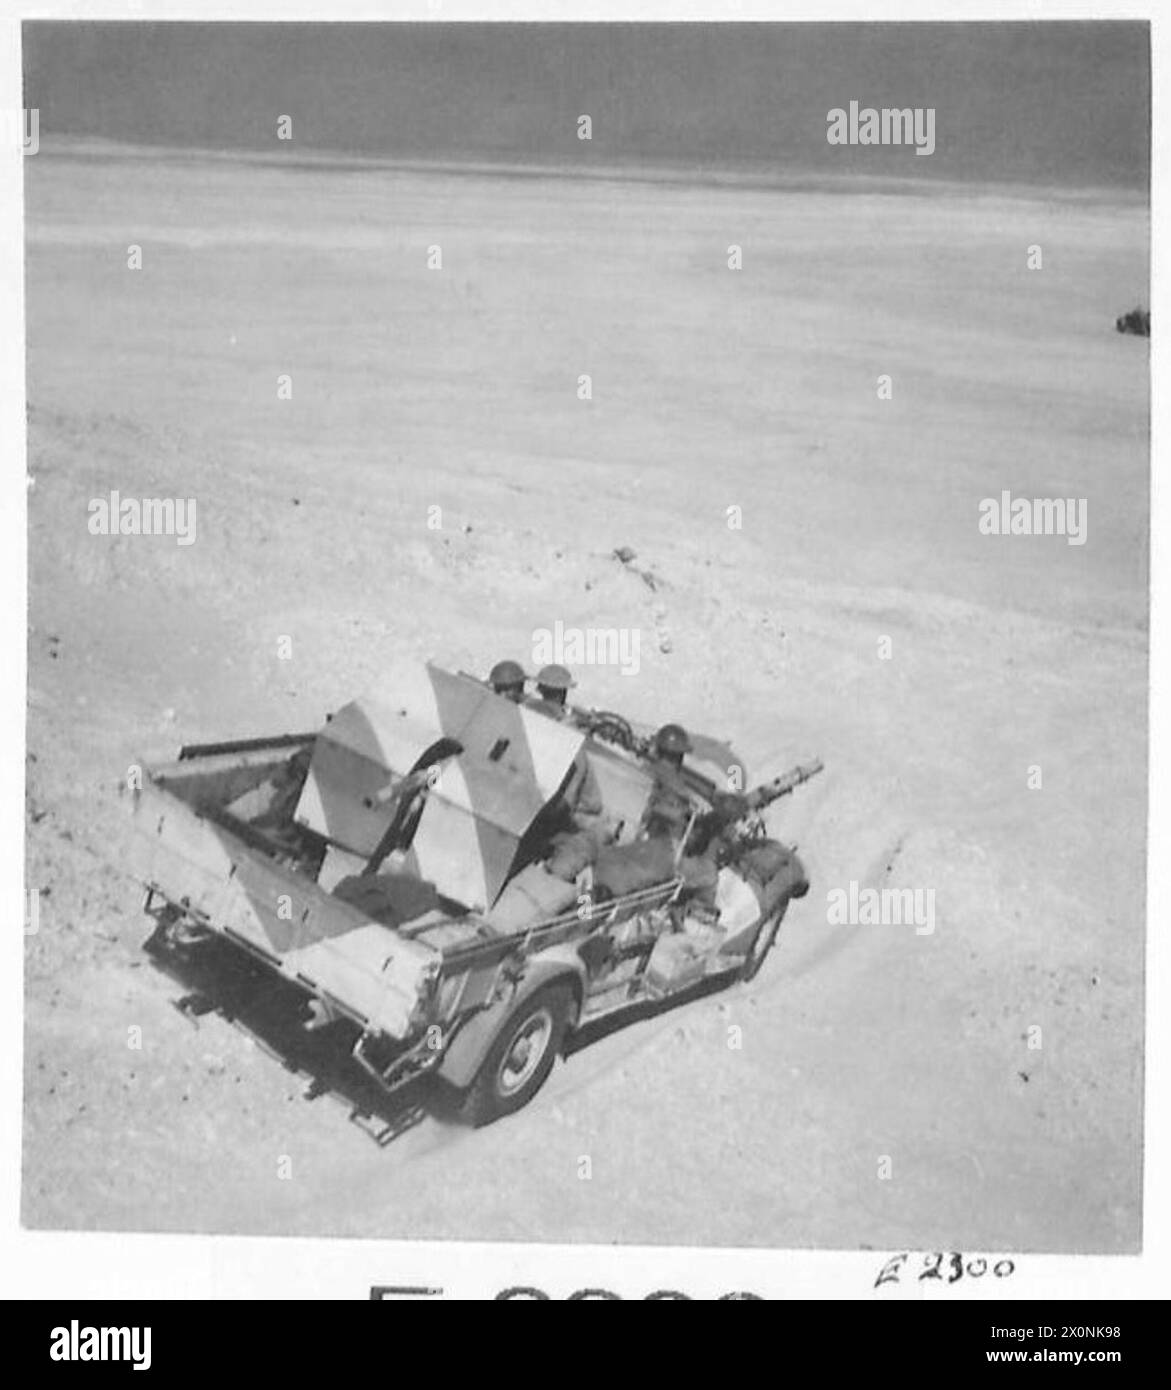 THE BRITISH ARMY IN NORTH AFRICA 1941 - A patrol of the Long Range Desert Group in the Western Desert. Photo shows - vehicle covering difficult terrain Stock Photo